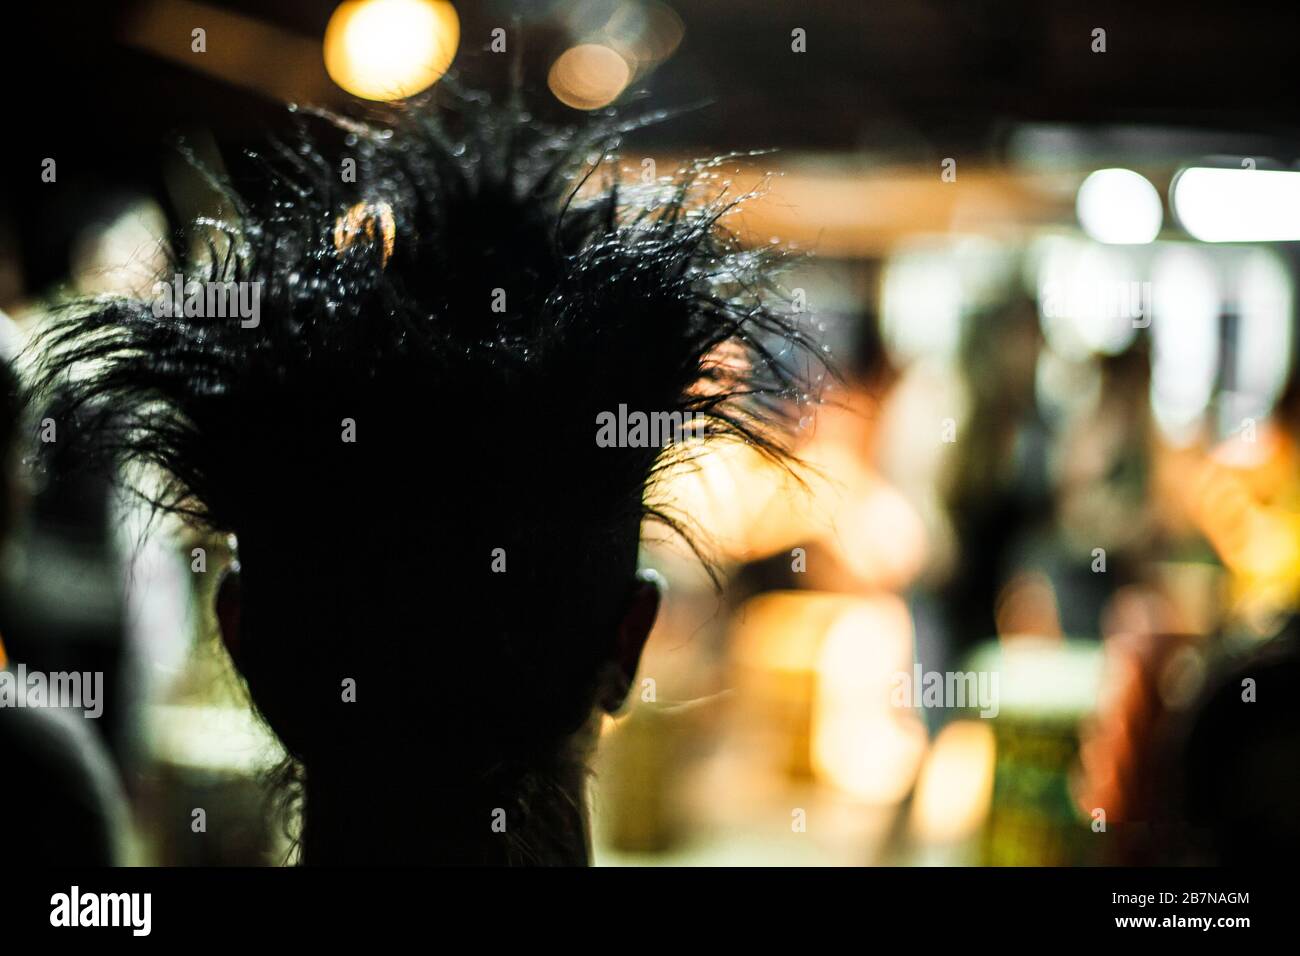 A close up backlit view of a person with a crazy hairstyle seen from behind. Spiky and styled hair silhouette in a club by night with copy space. Stock Photo